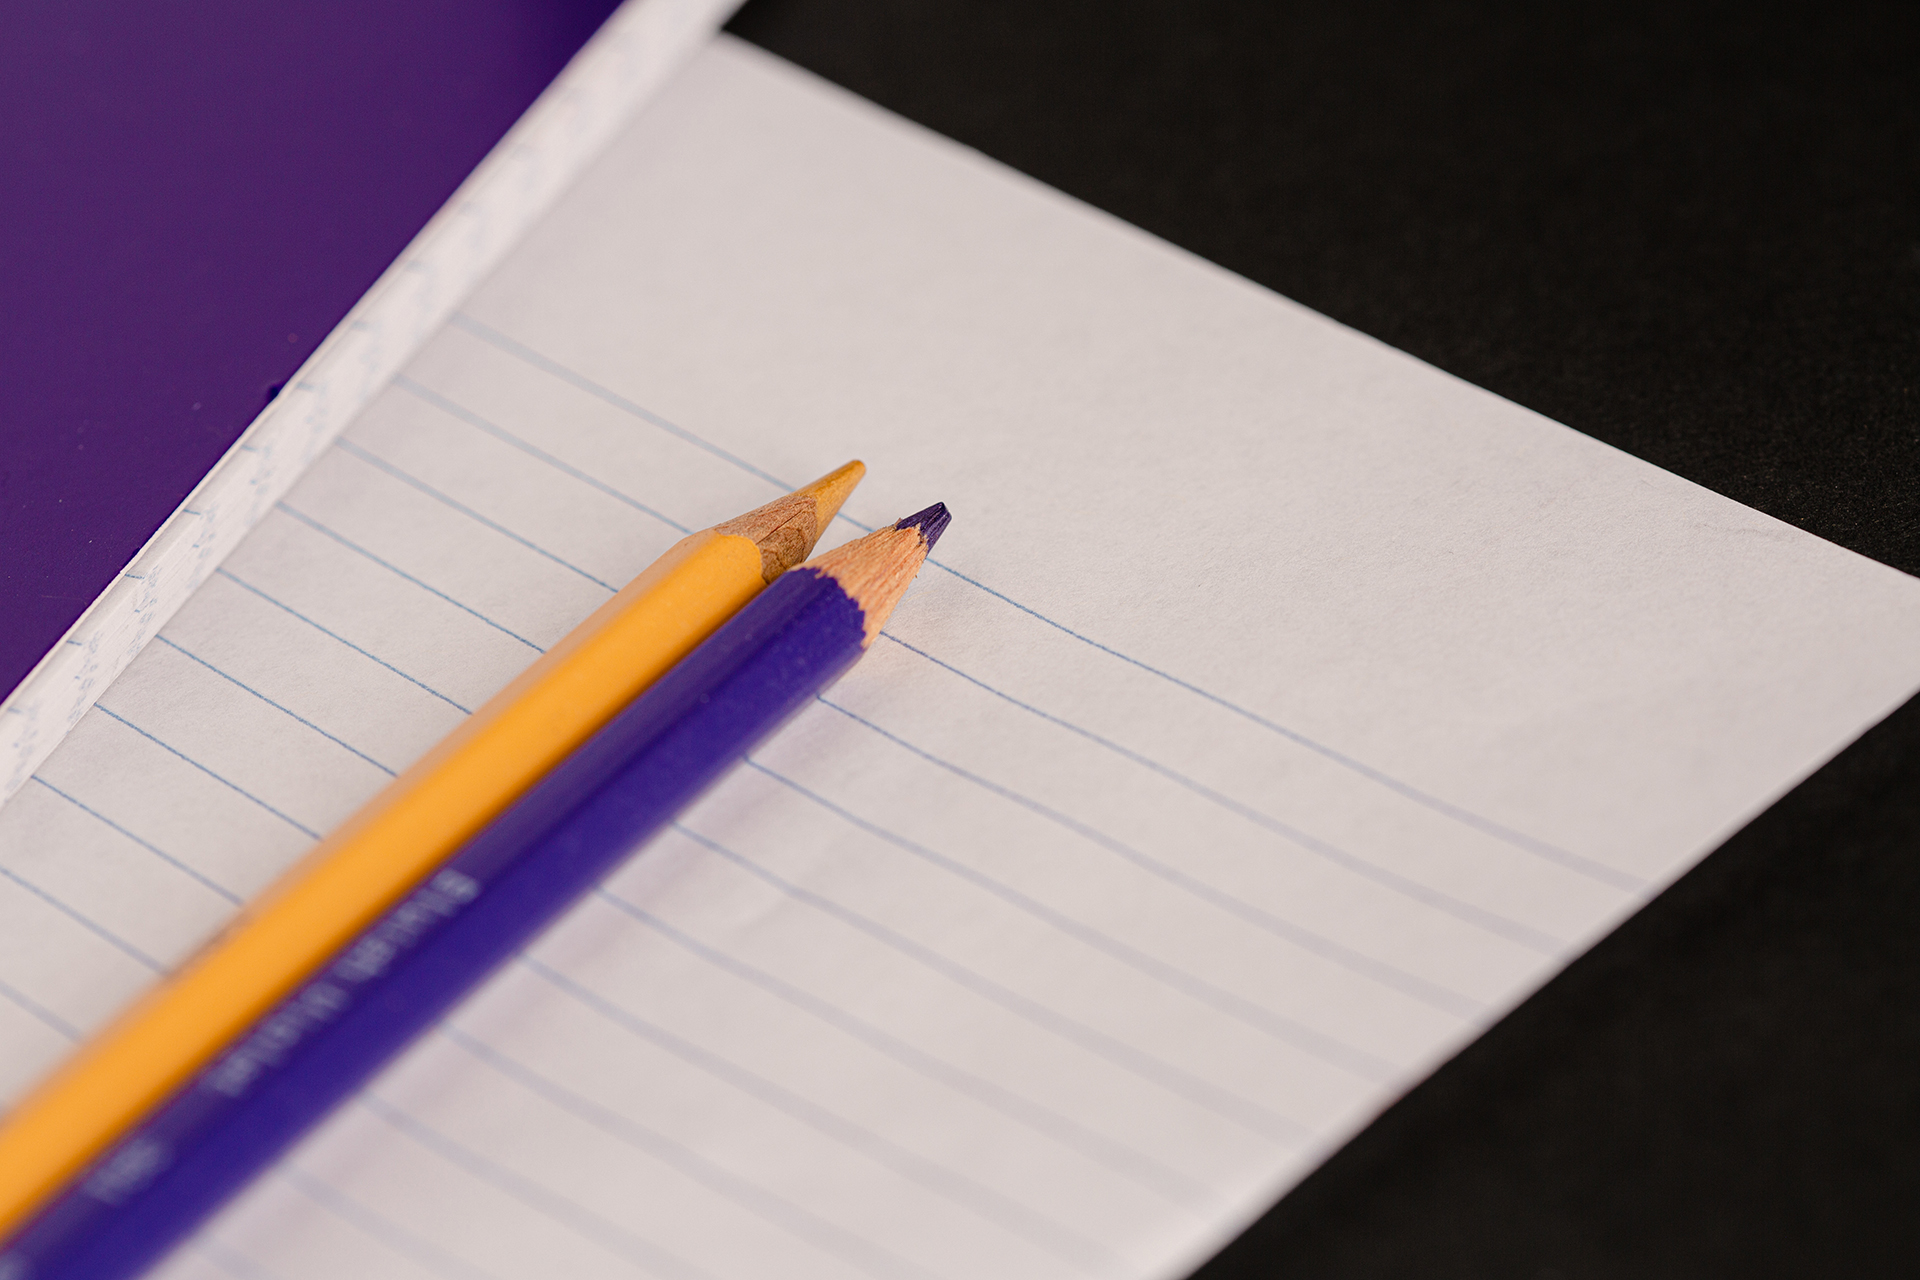 A yellow and a purple pencil rest on a blank page.